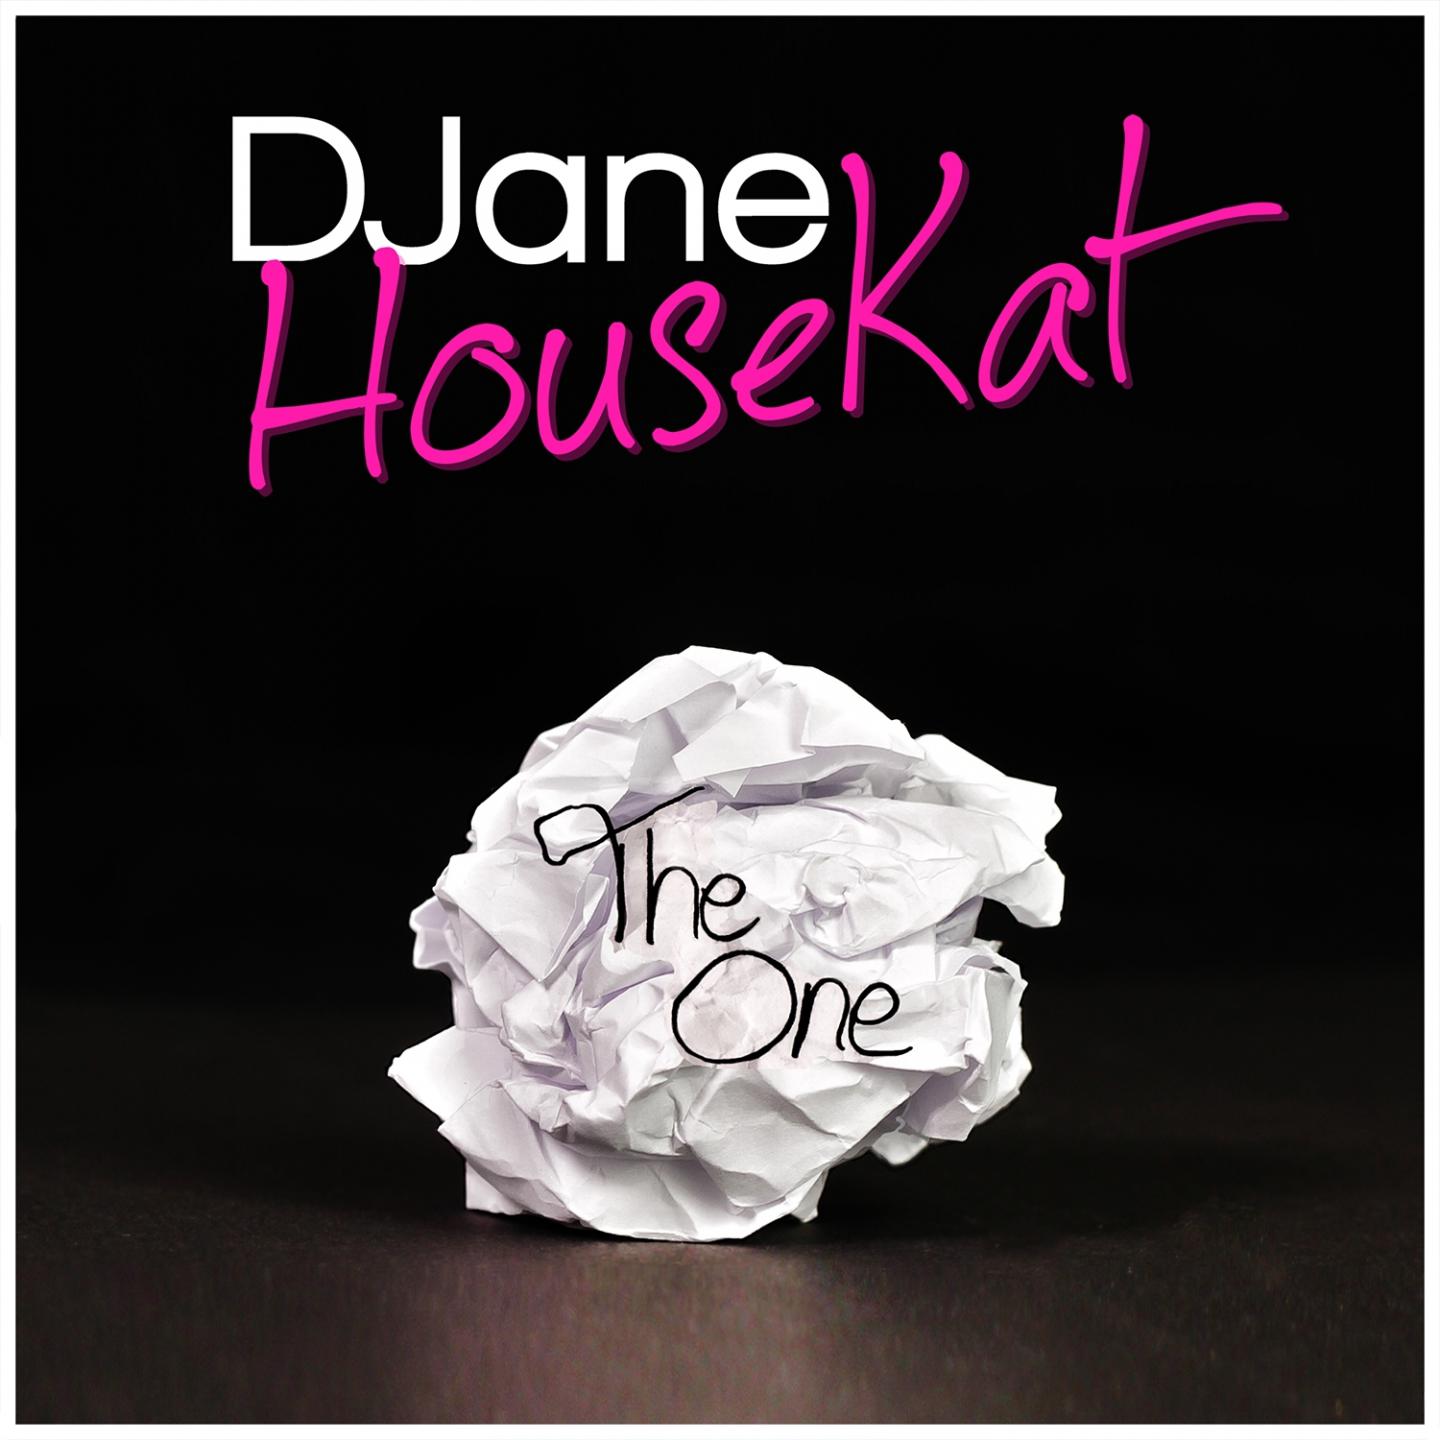 DJane HouseKat - The One (Extended Version)